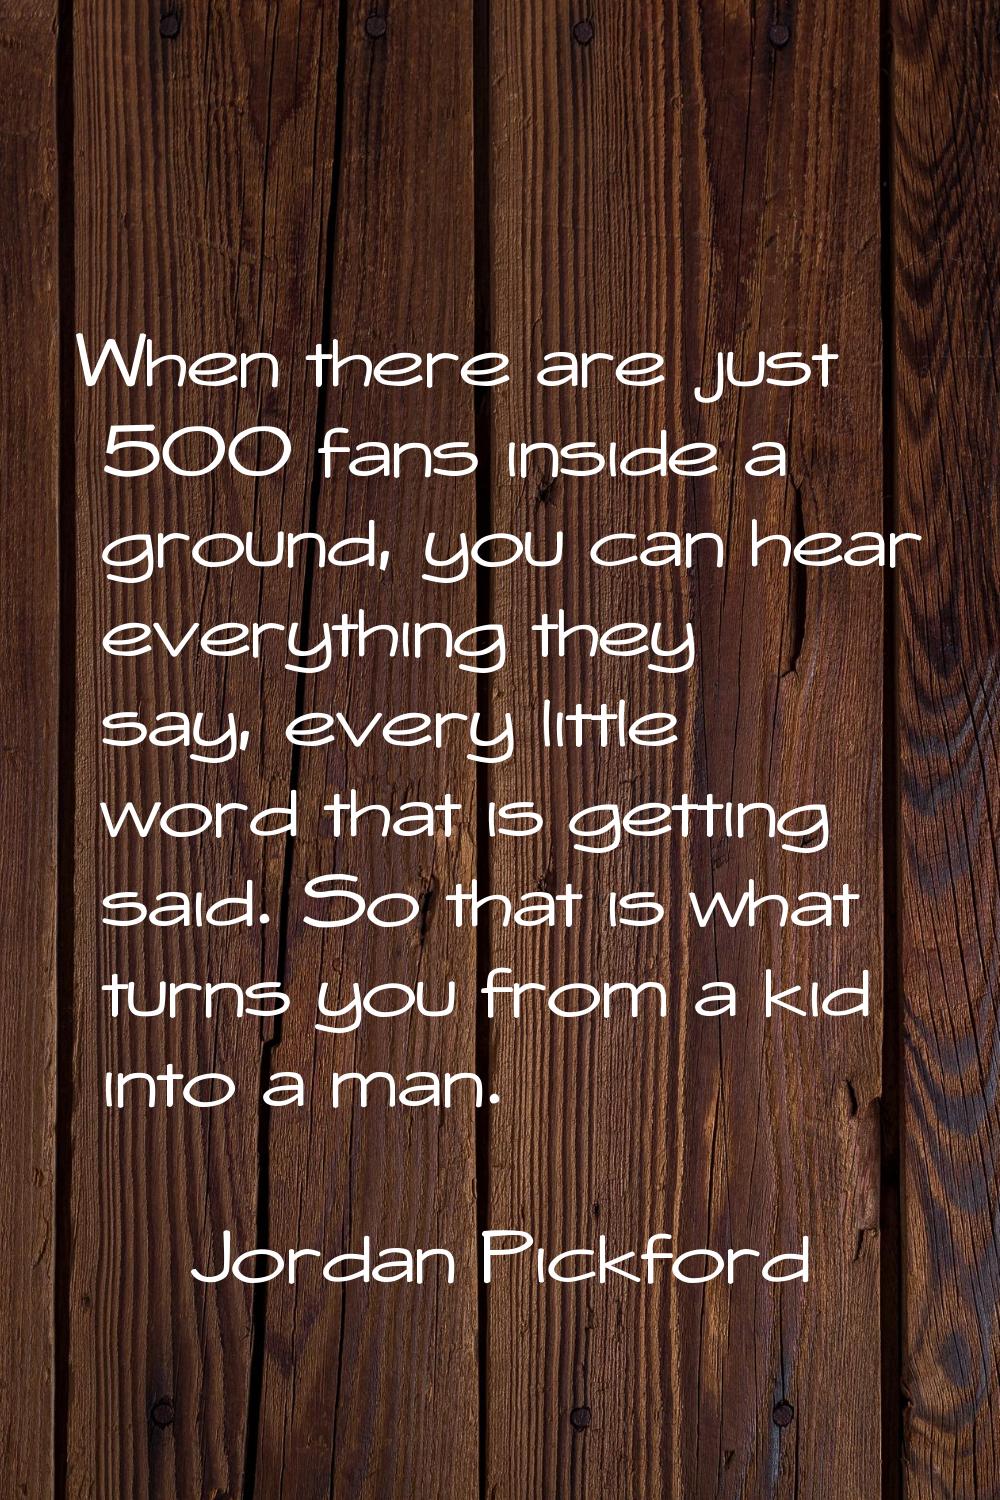 When there are just 500 fans inside a ground, you can hear everything they say, every little word t